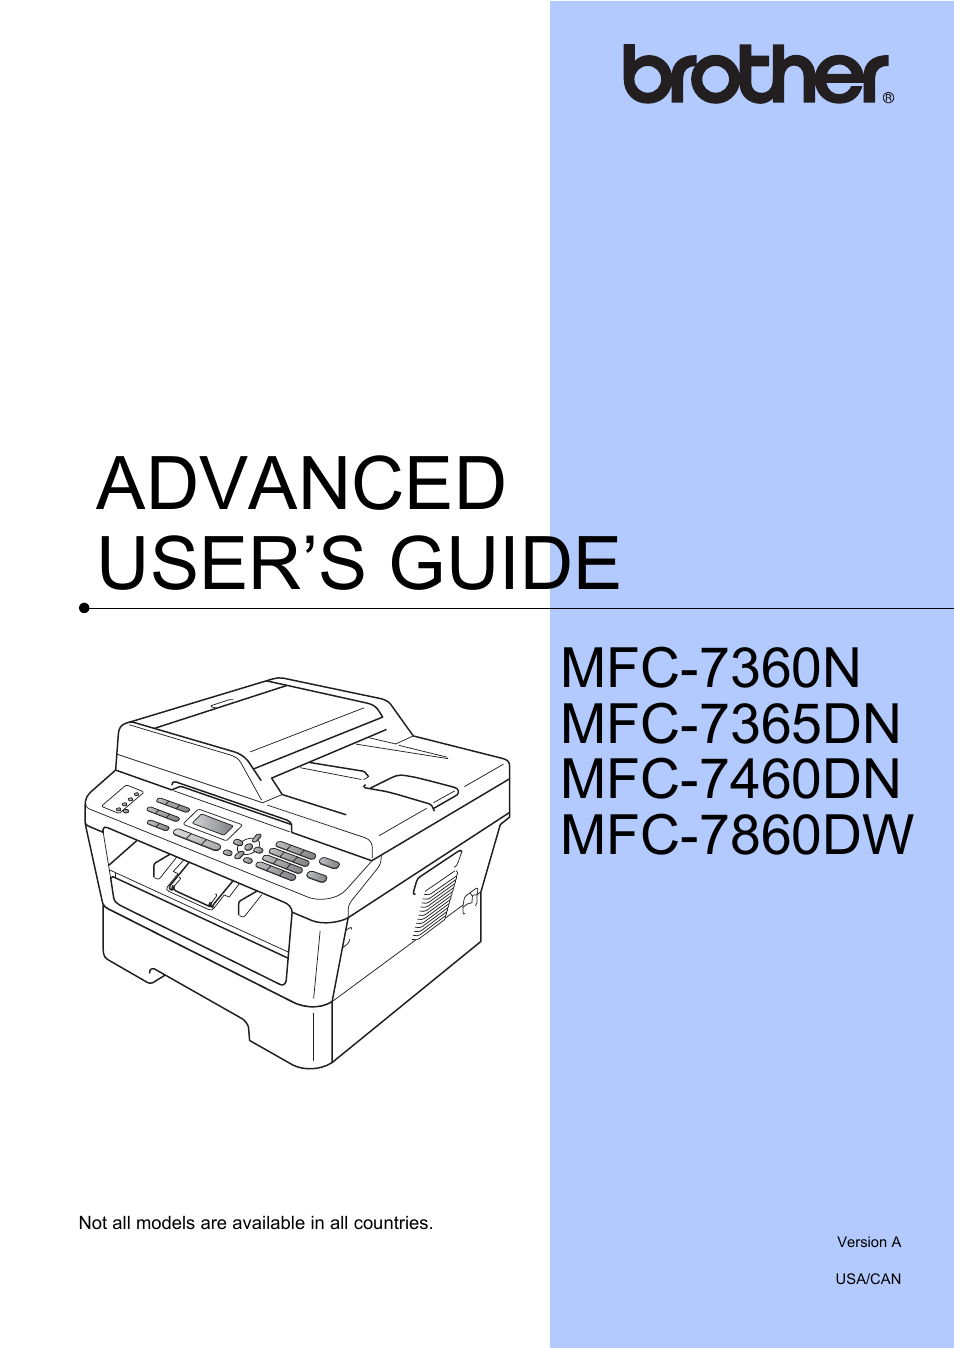 Brother MFC 7460DN User Manual | 76 pages | Also for: MFC 7860DW, MFC 7360N,  MFC-7365DN